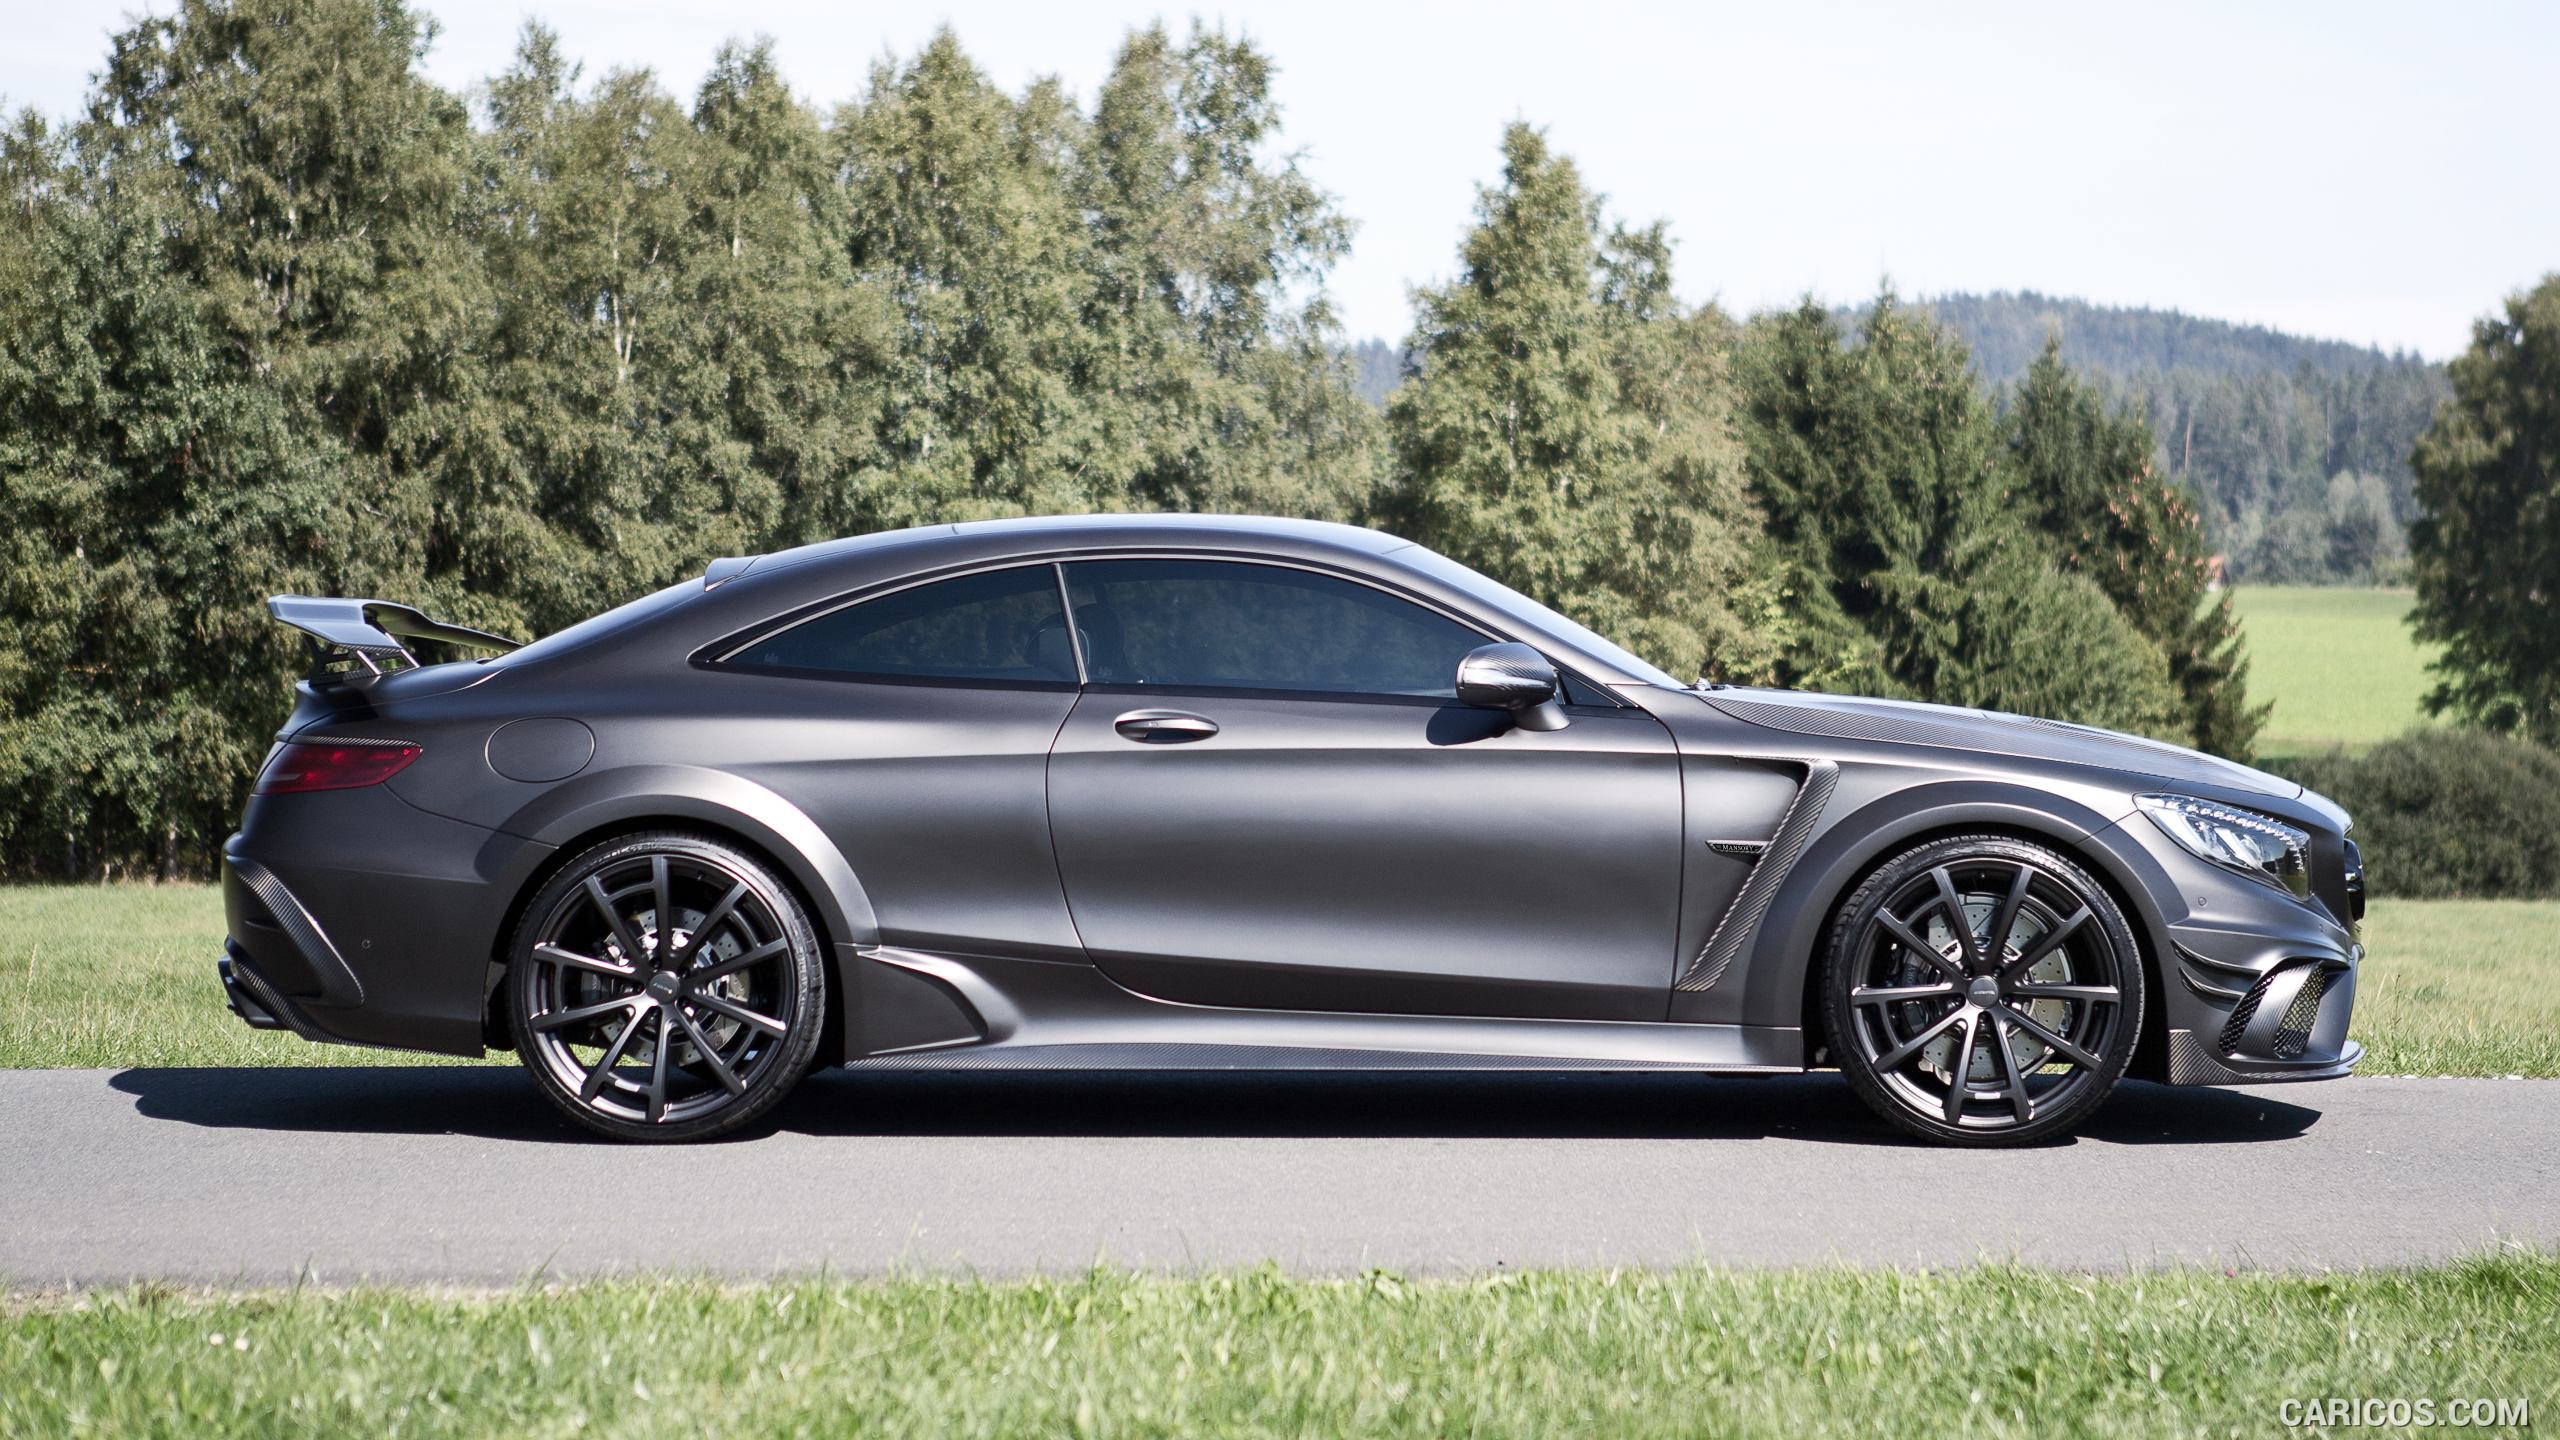 2015 MANSORY Mercedes S63 AMG Coupe Black Edition - Side, #5 of 12